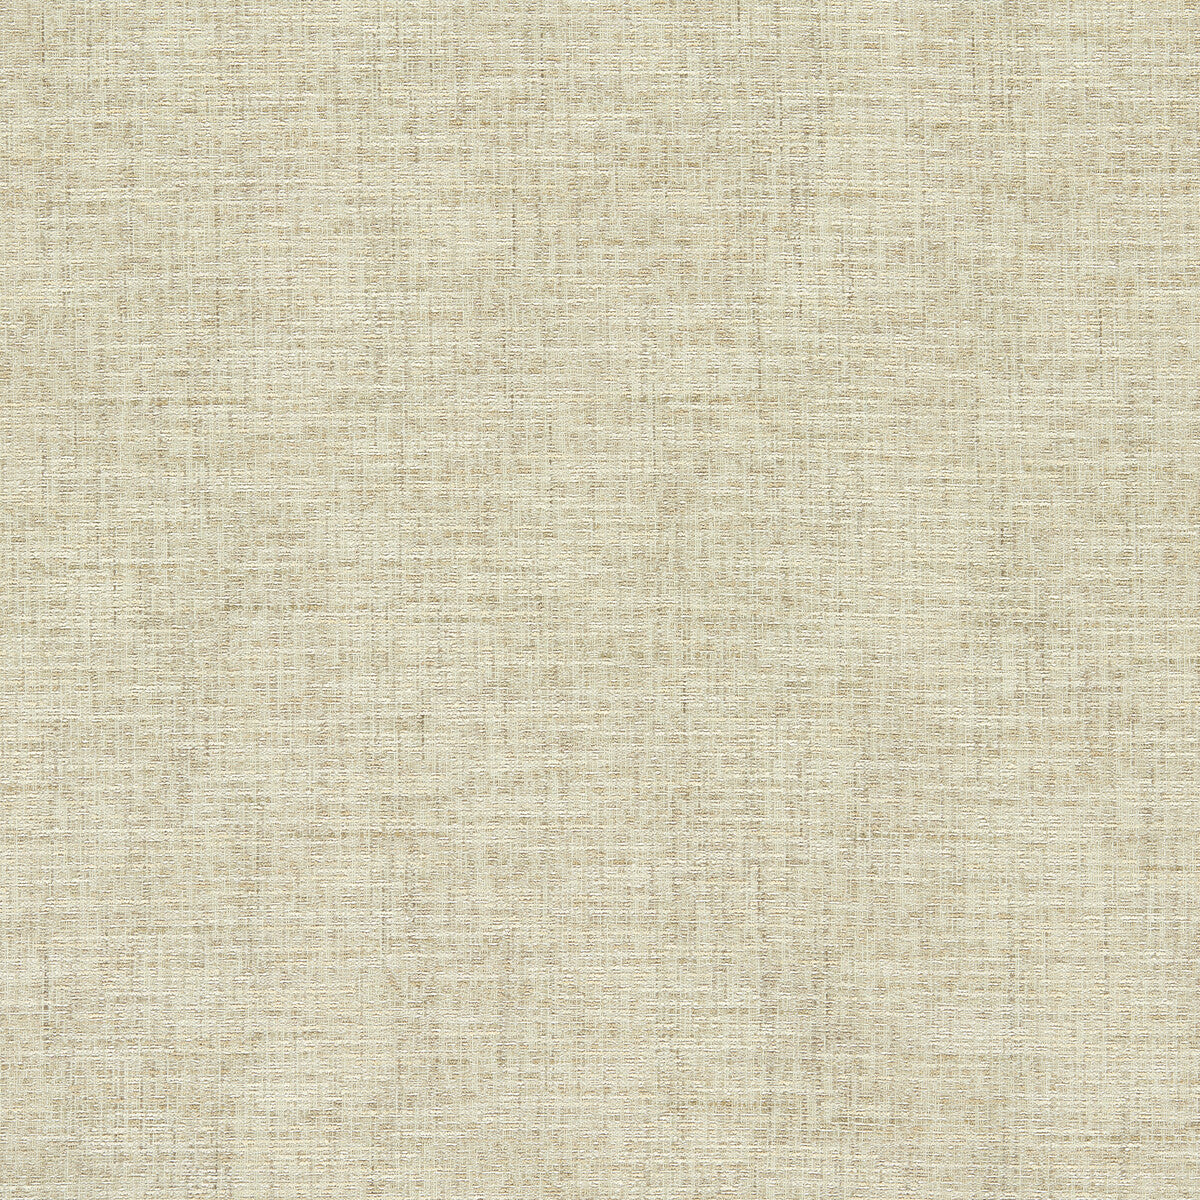 Cetara fabric in natural color - pattern F1642/12.CAC.0 - by Clarke And Clarke in the Cetara collection